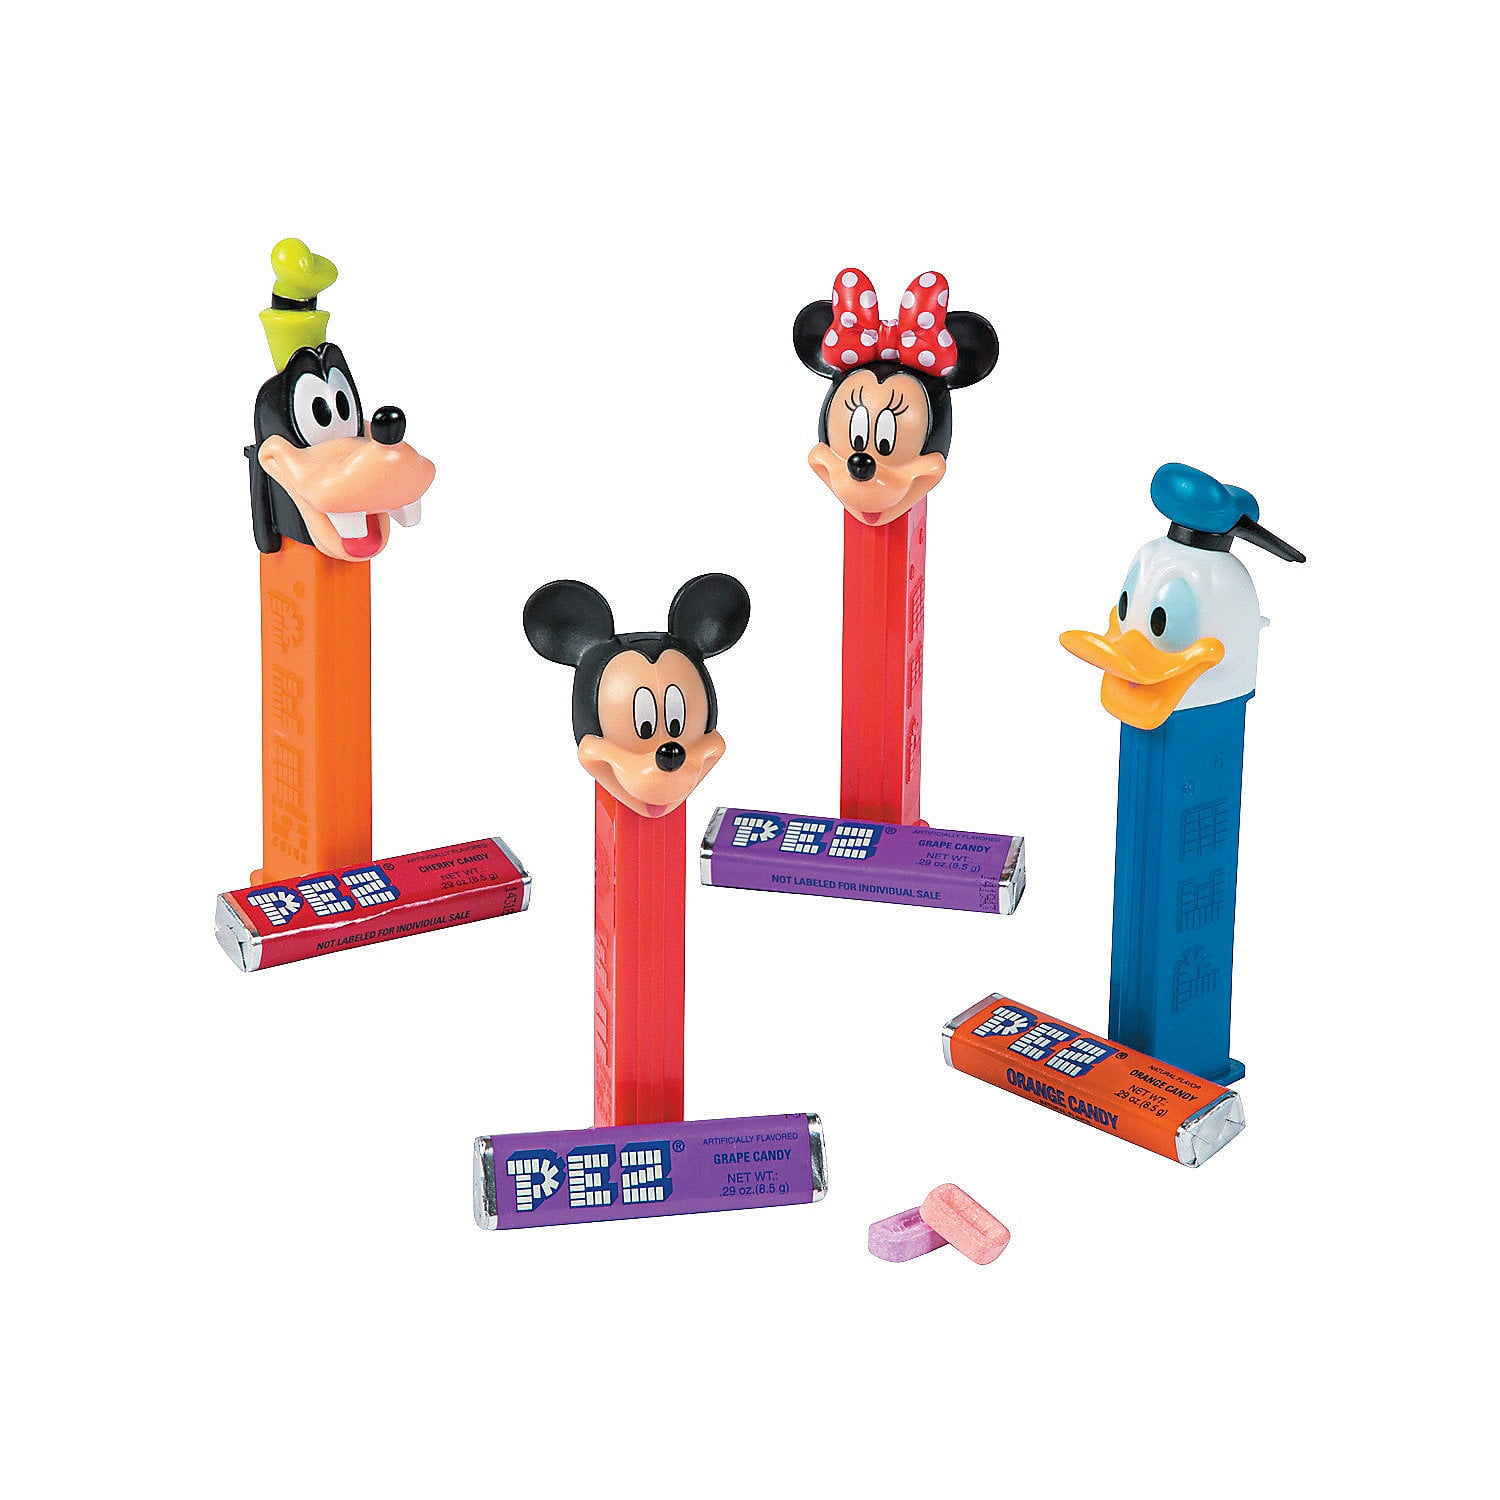 PEZ Candy Jake Pez Dispenser with Rolls of Candy